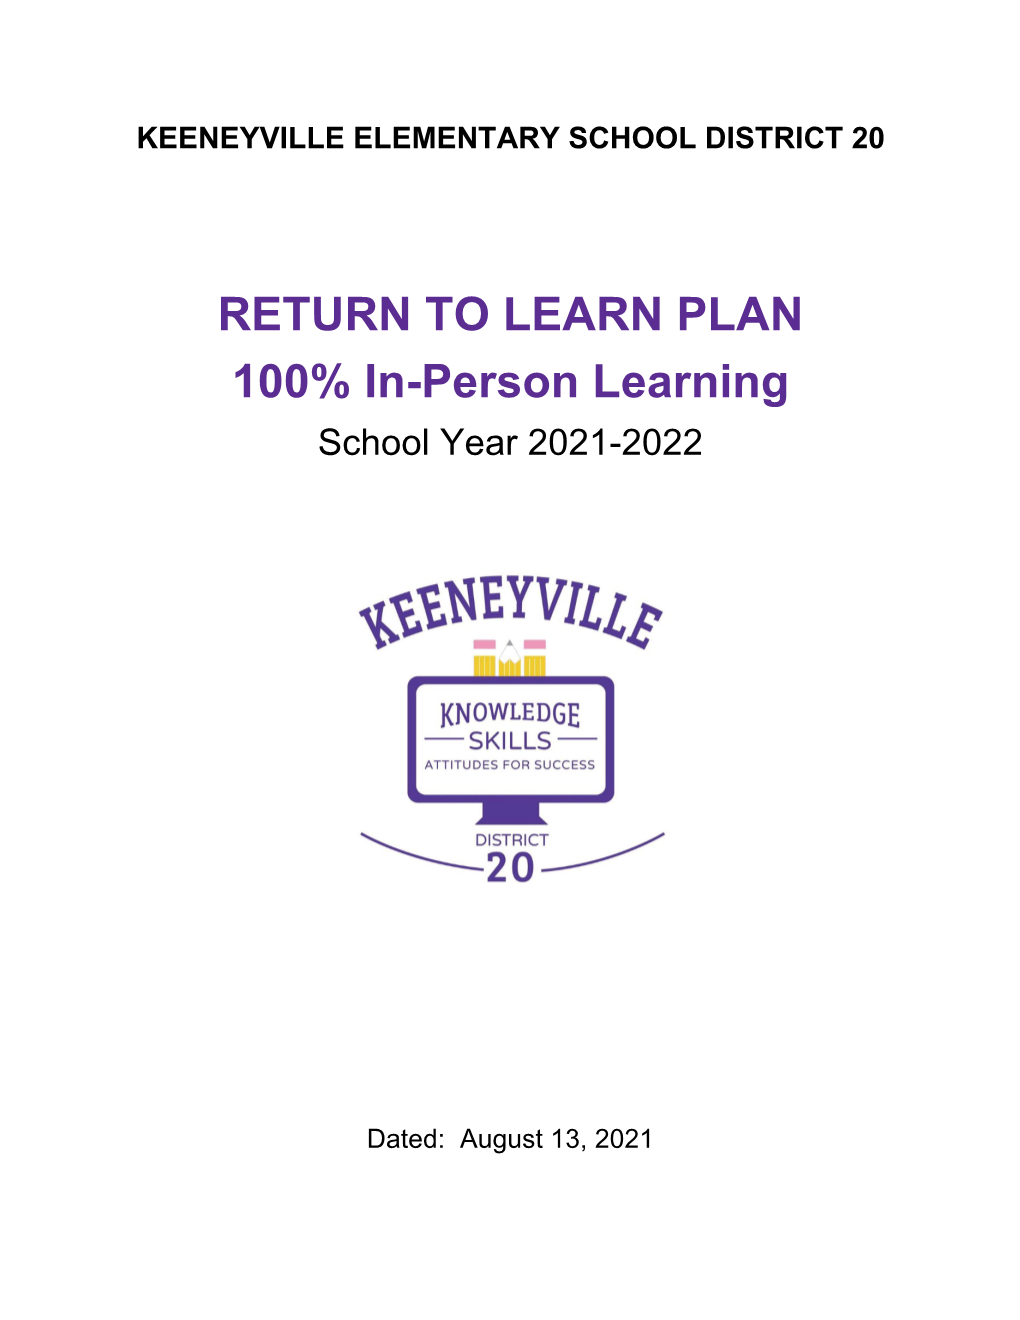 D20 Return to Learn Plan: 100% In-Person Learning 2021-2022